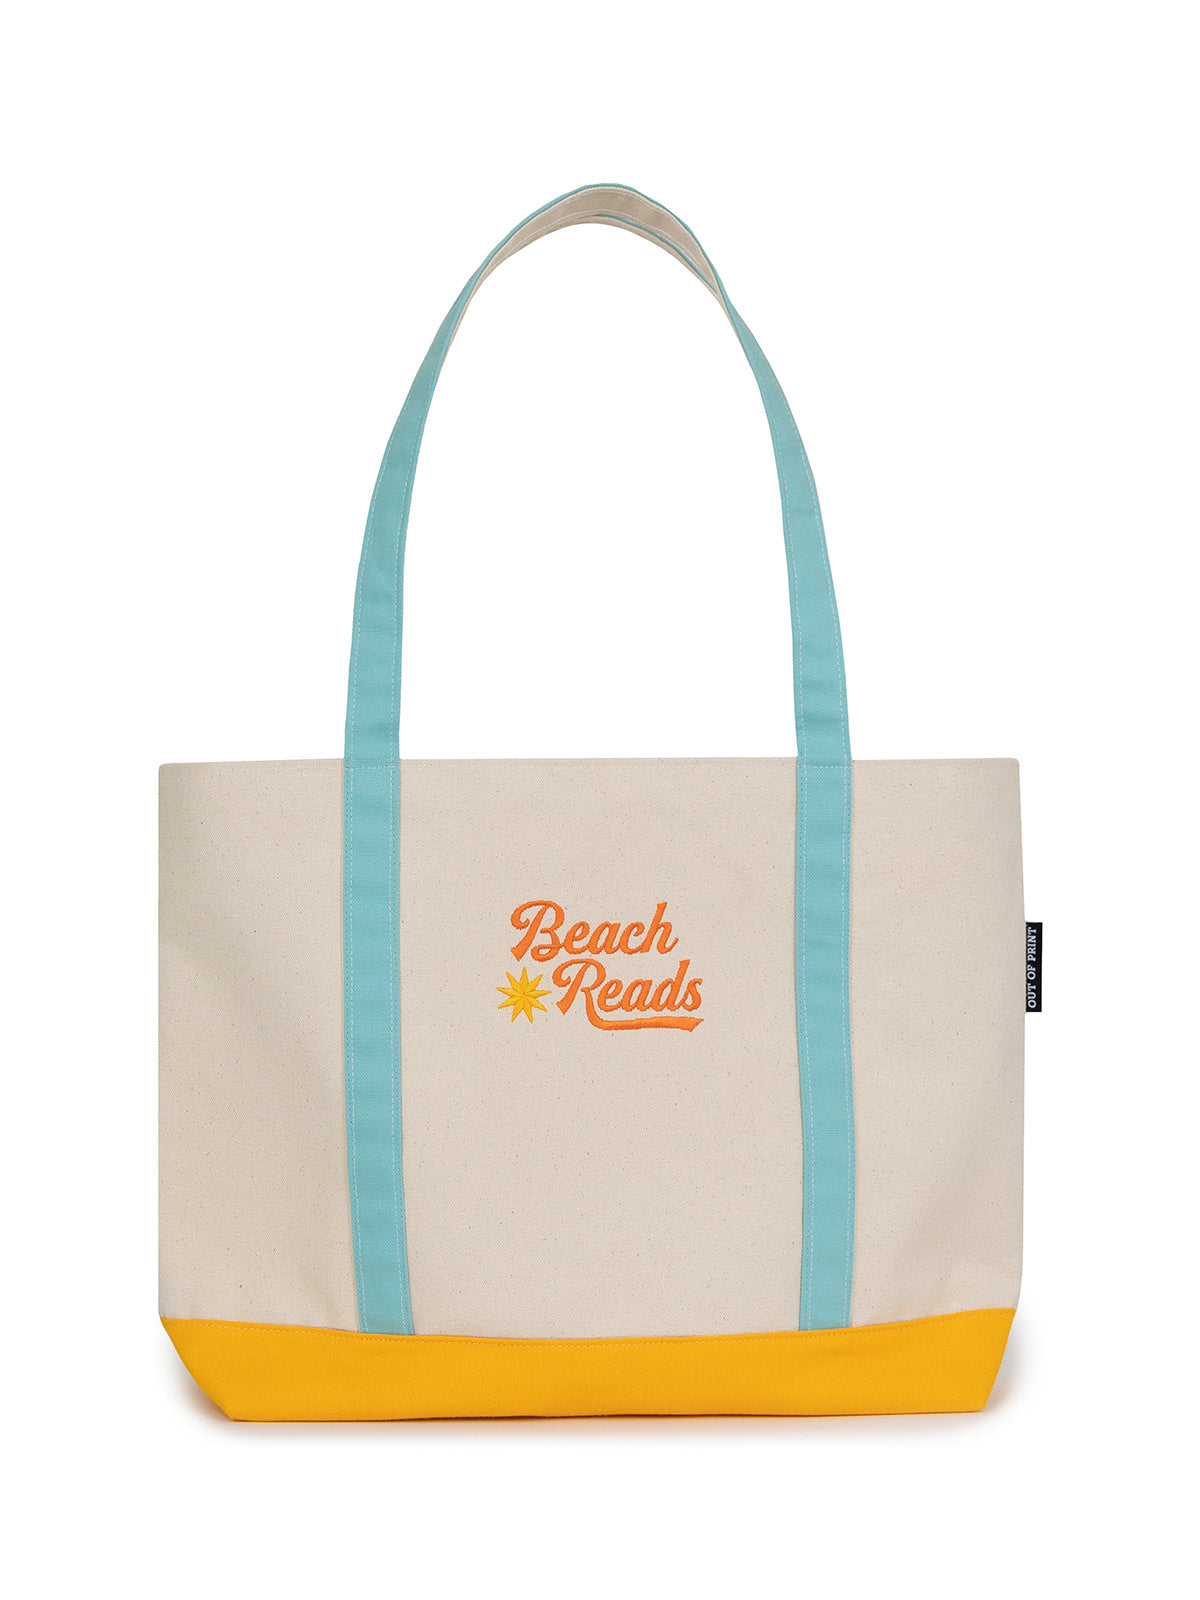 Book Cover Tote Bags